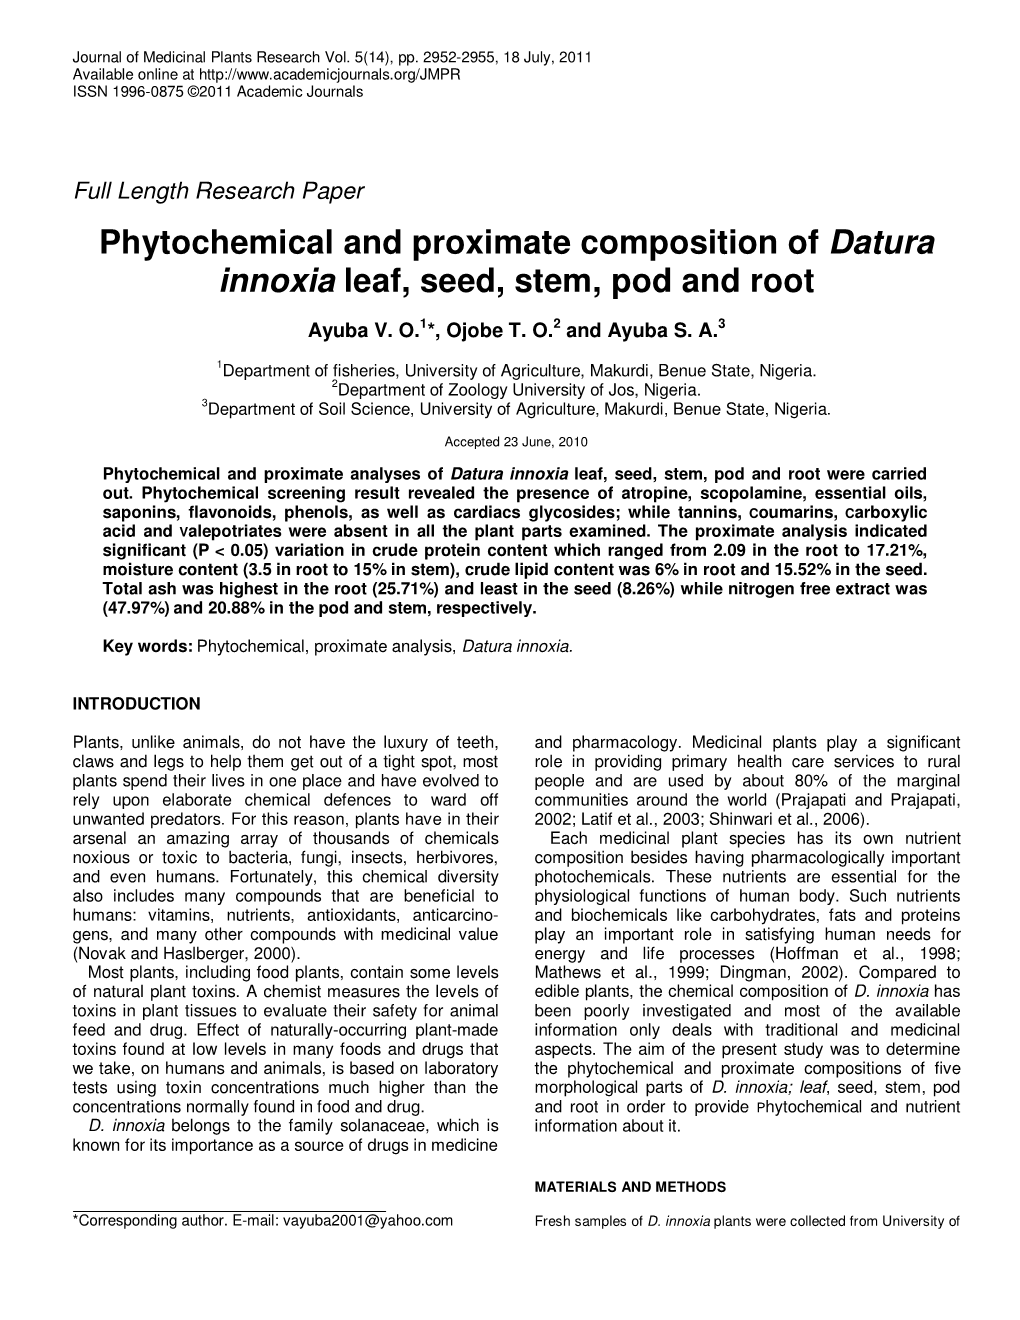 Phytochemical and Proximate Composition of Datura Innoxia Leaf, Seed, Stem, Pod and Root